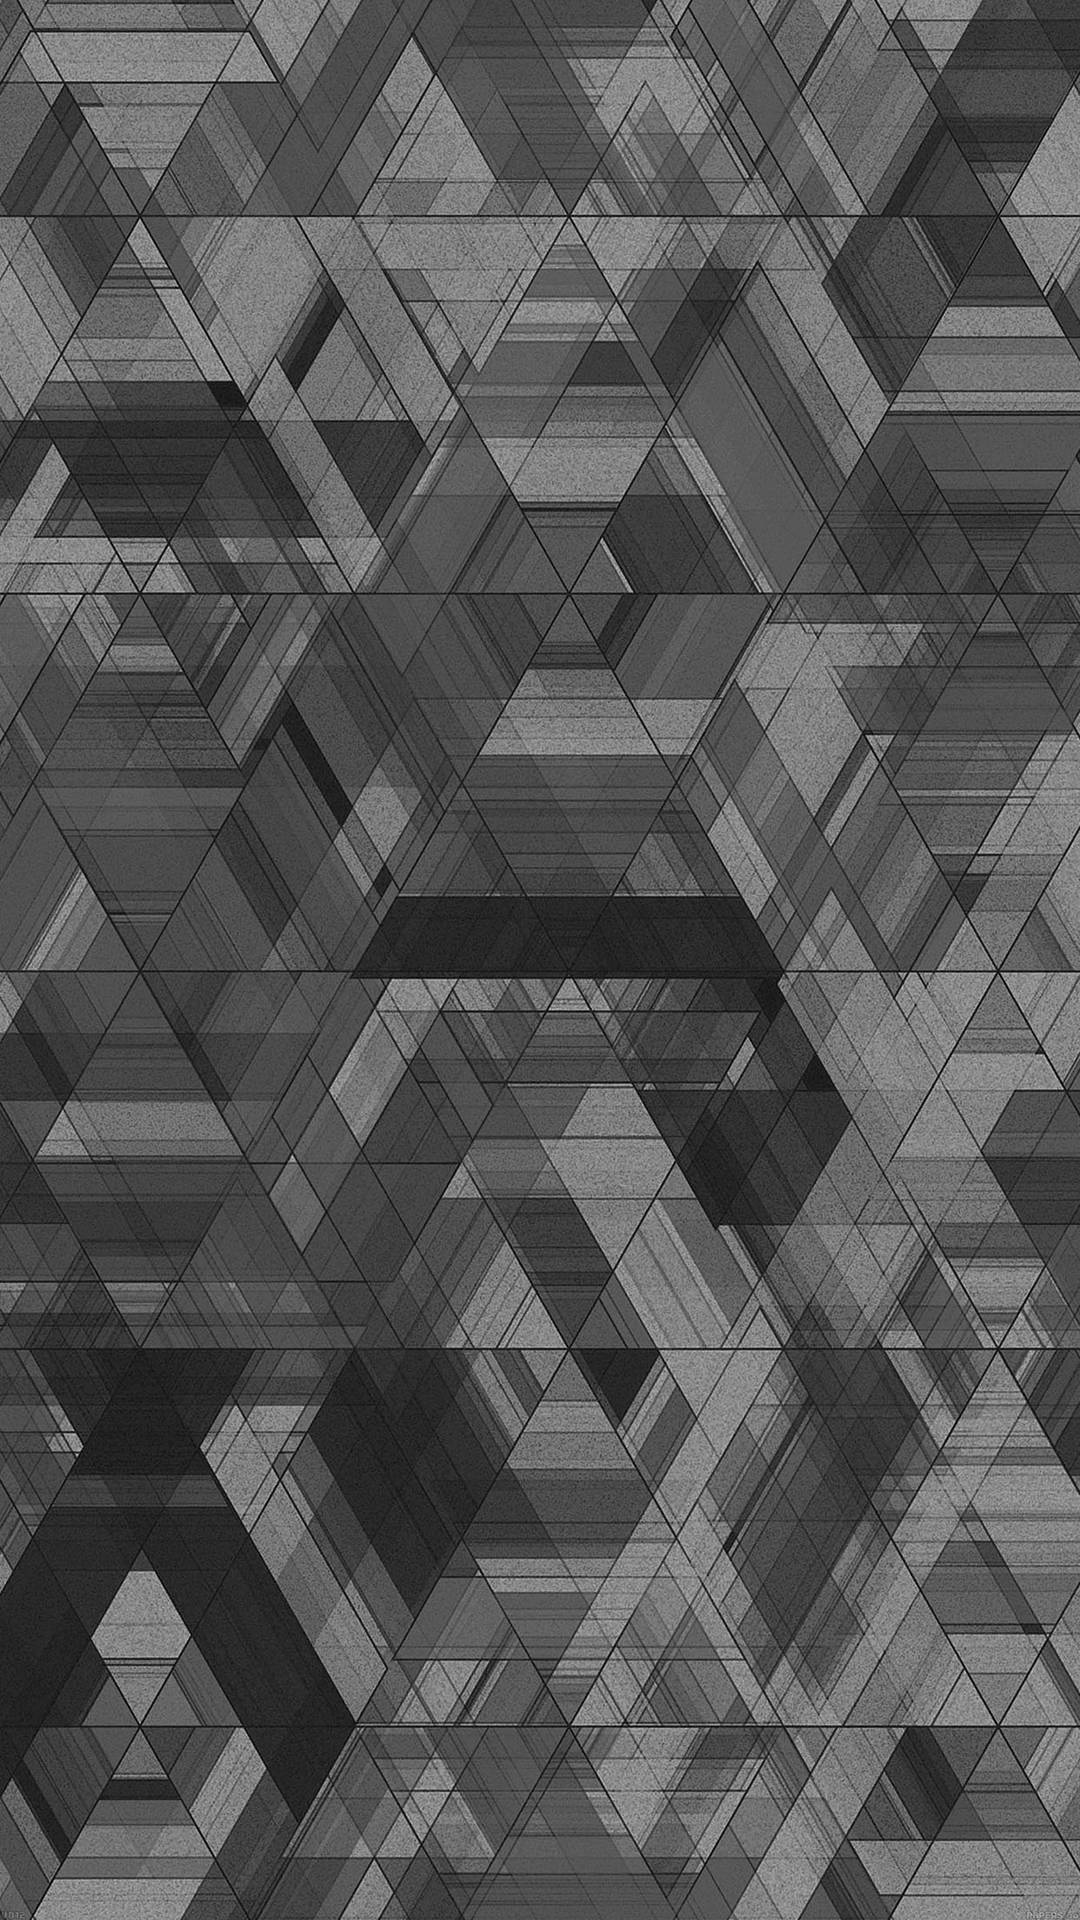 Sketch Triangles Black And Grey Iphone Wallpaper